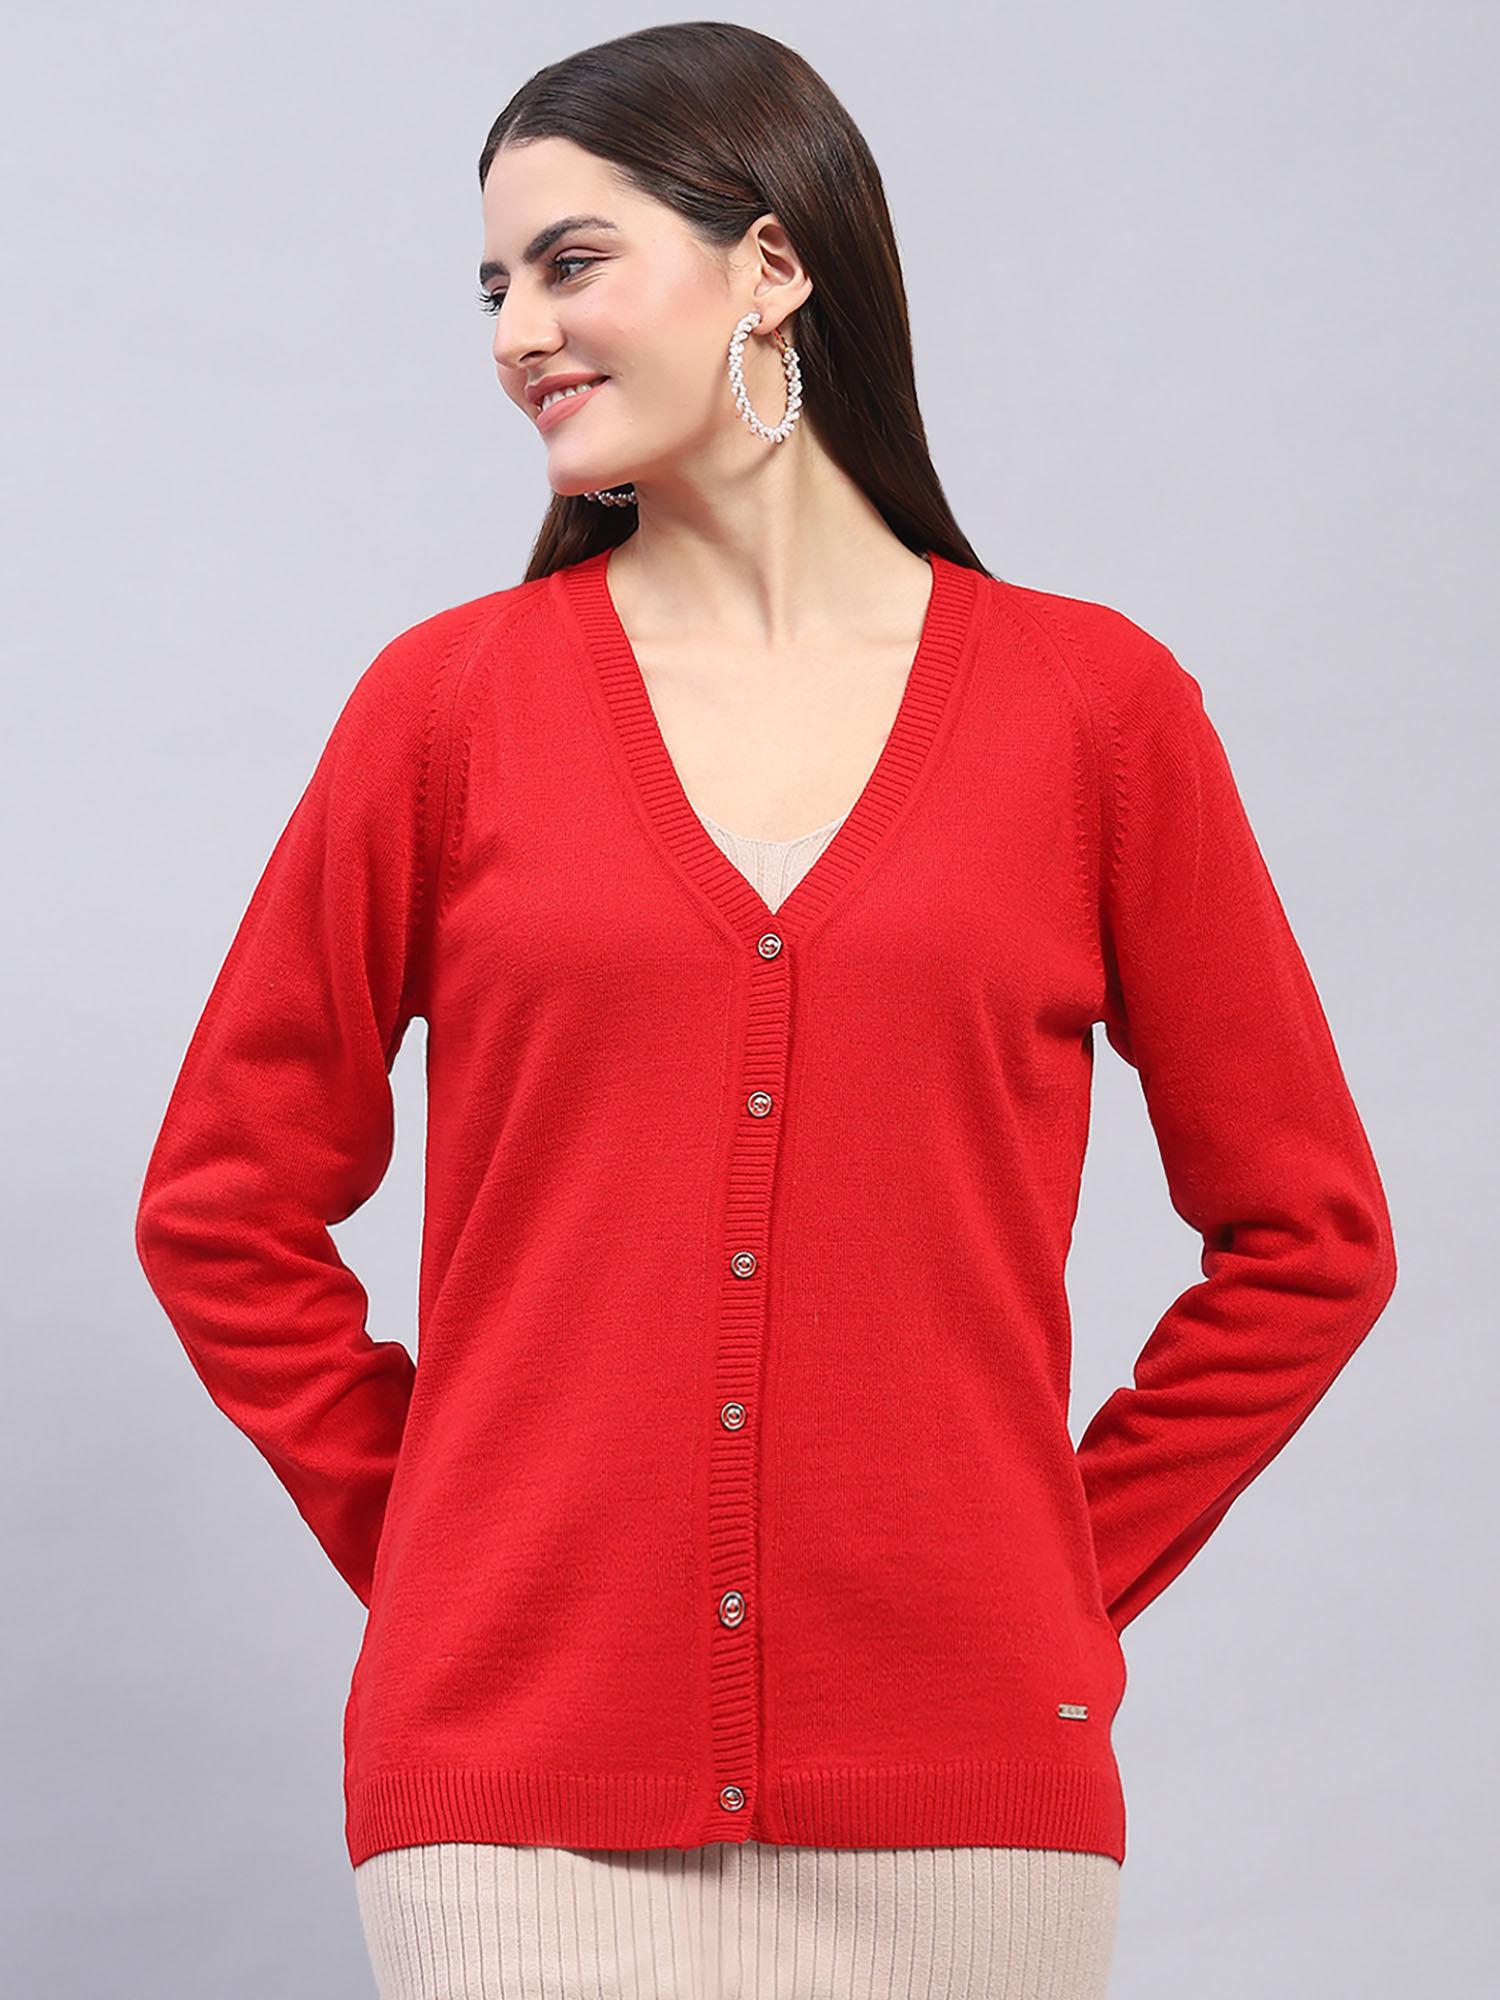 womens-red-solid-v-neck-full-sleeve-wool-blend-cardigan